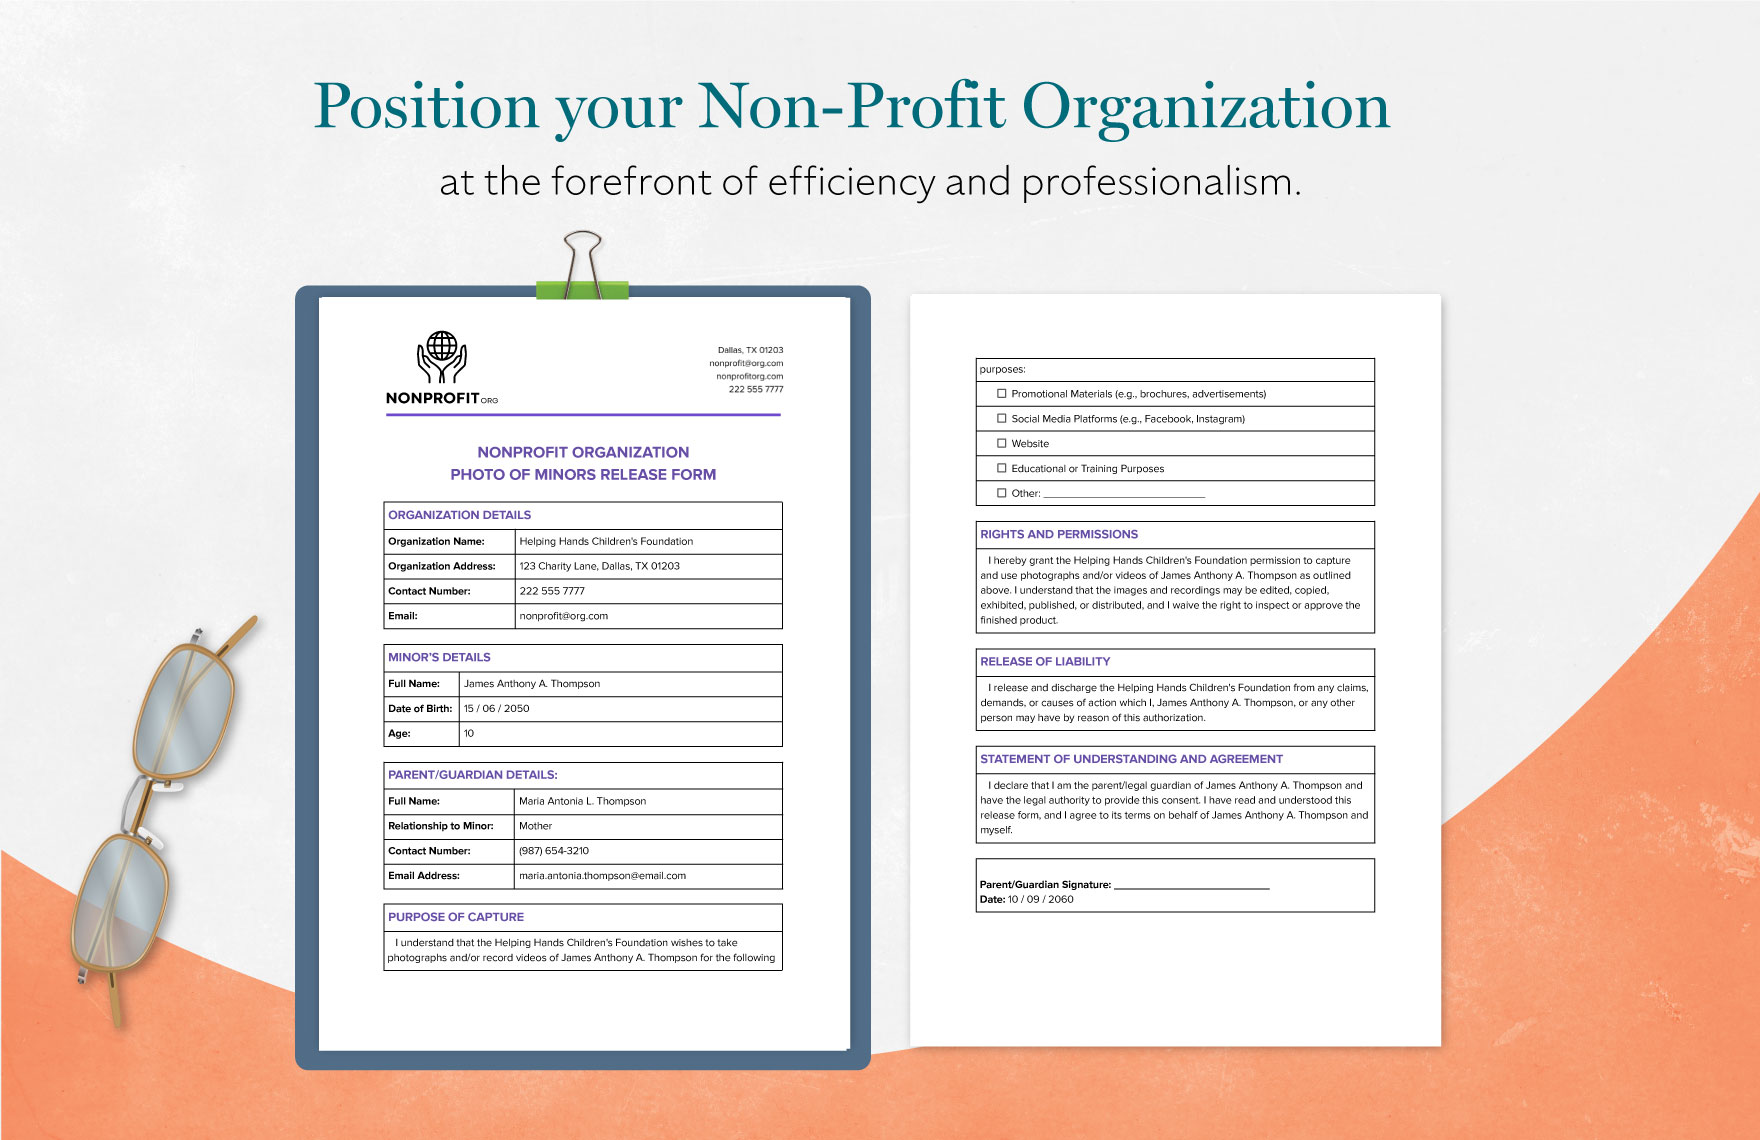 Nonprofit Organization Photo Of Minors Release Form Template